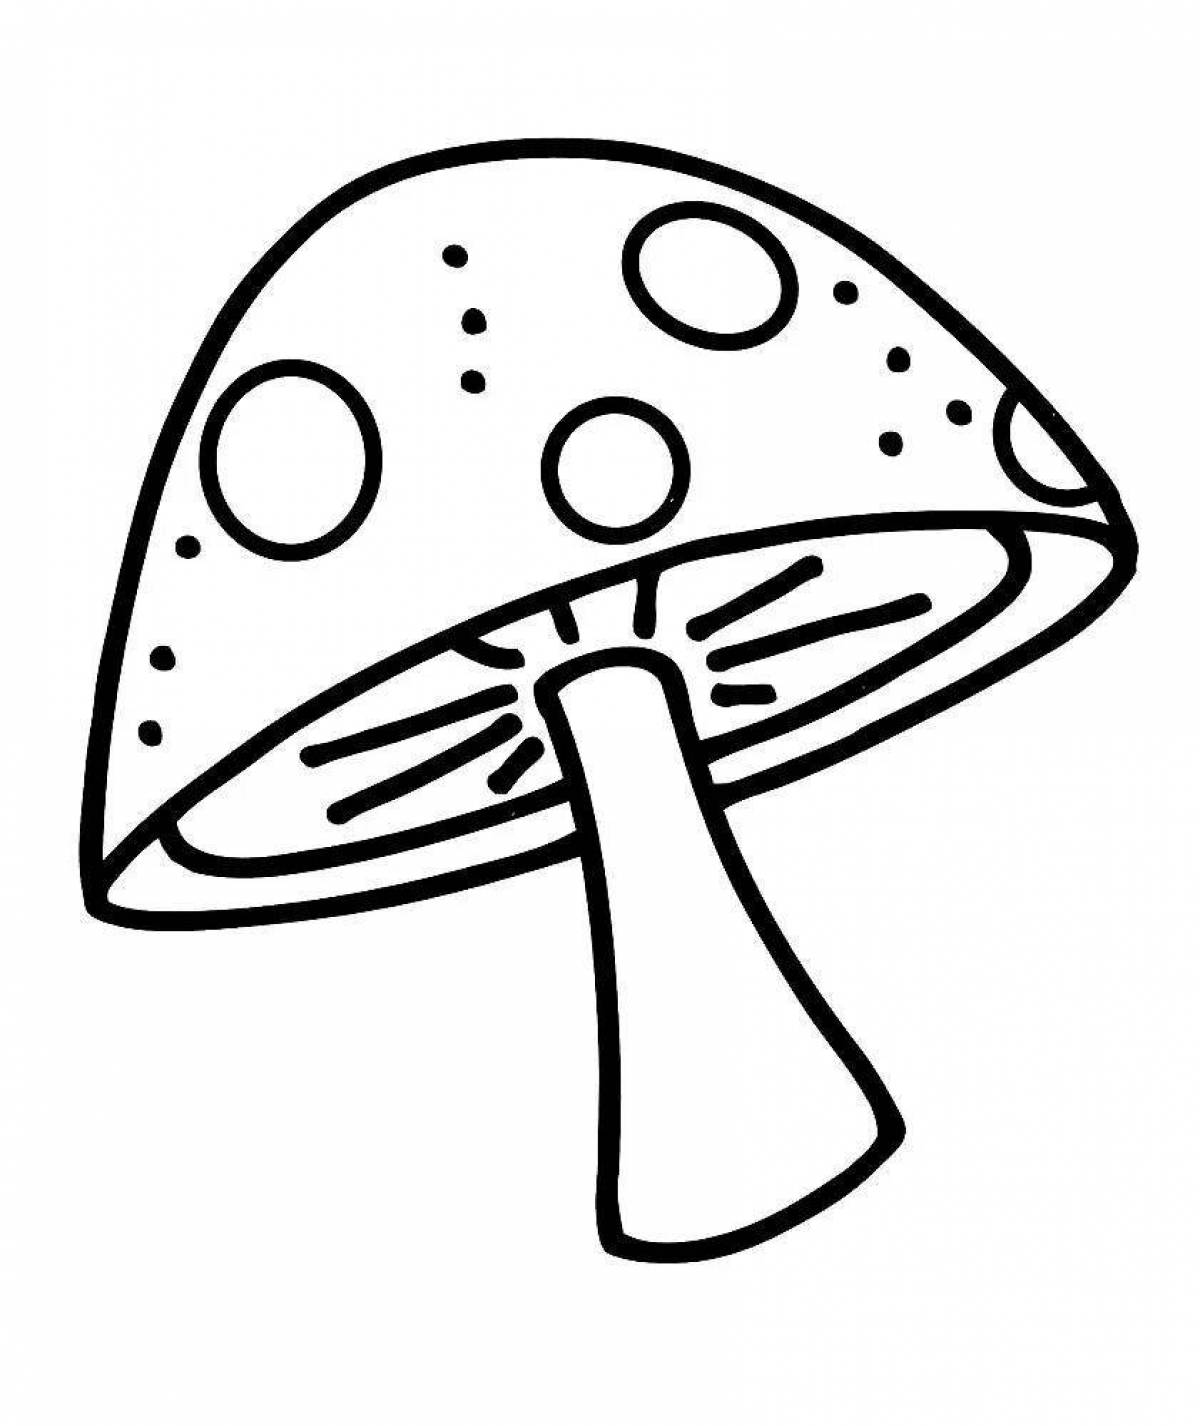 Adorable fly agaric coloring book